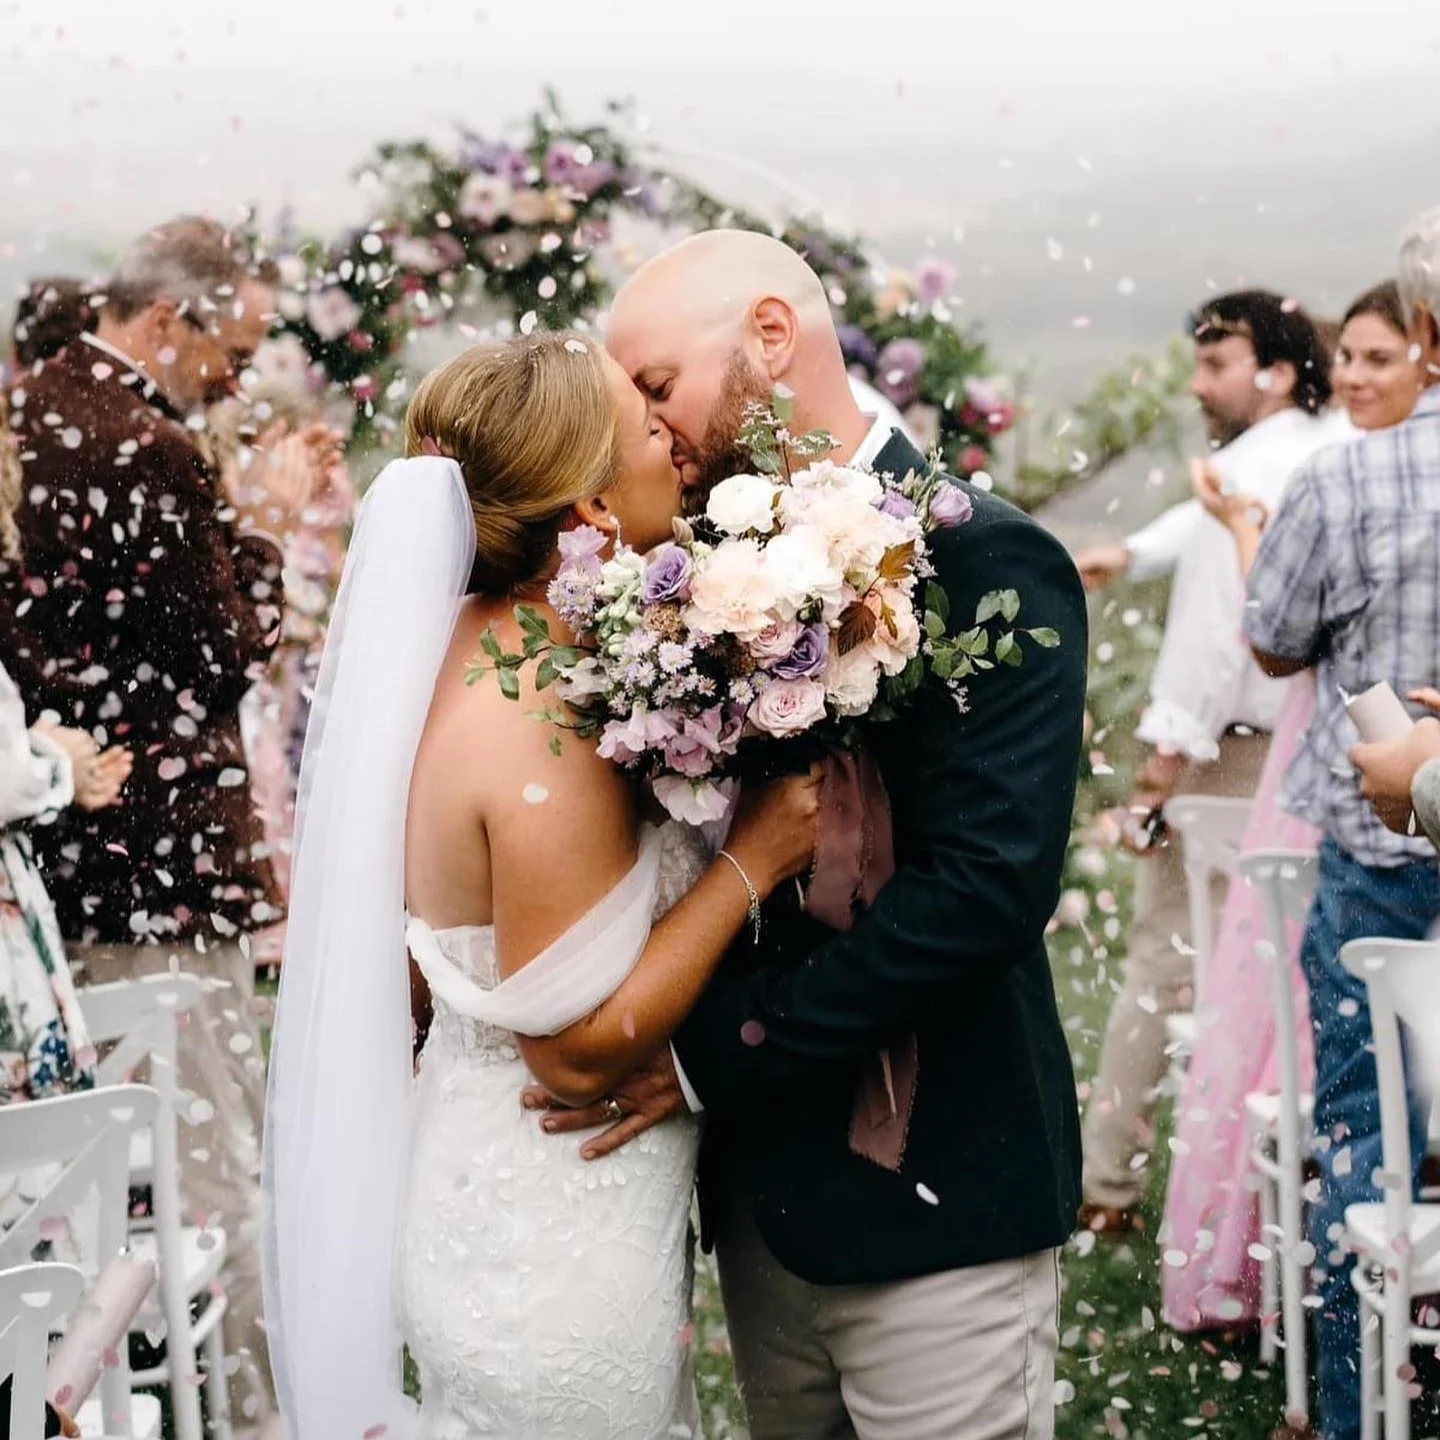 best-wedding-flowers-and-bouquets-queensland-shannon-hawkes-artisan-florals-photo-@grey.skies.photographics